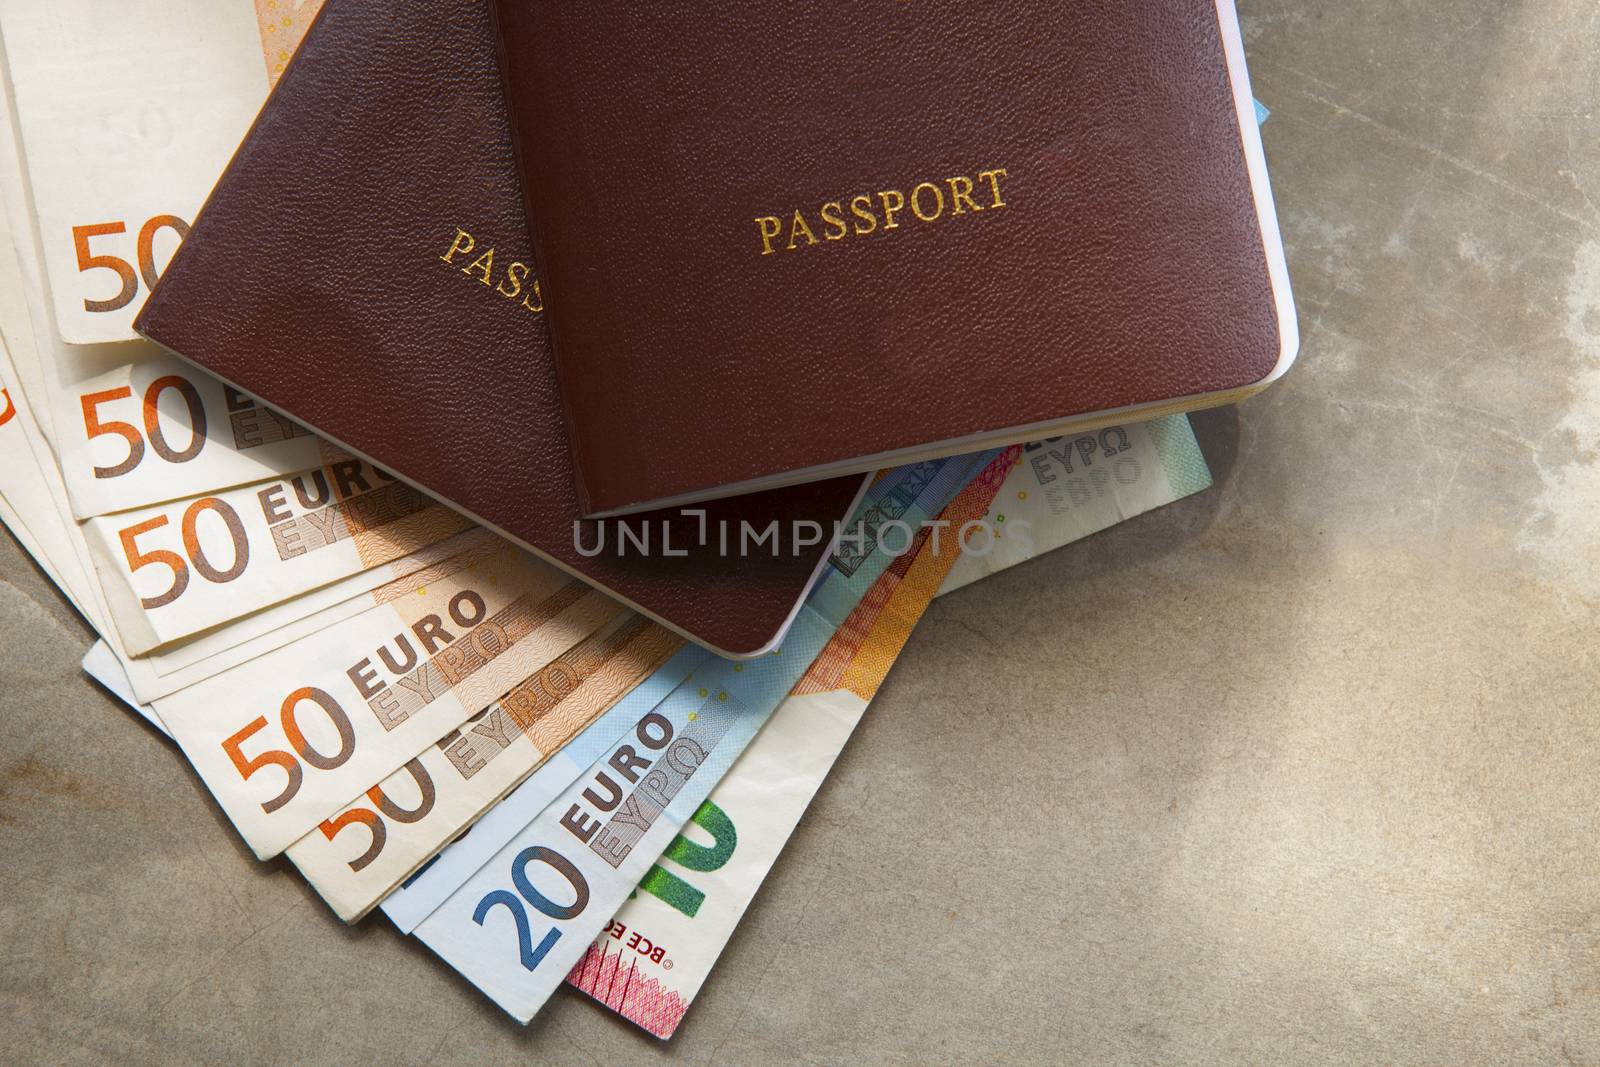 red passport book cover and euro banknote on earth tone background